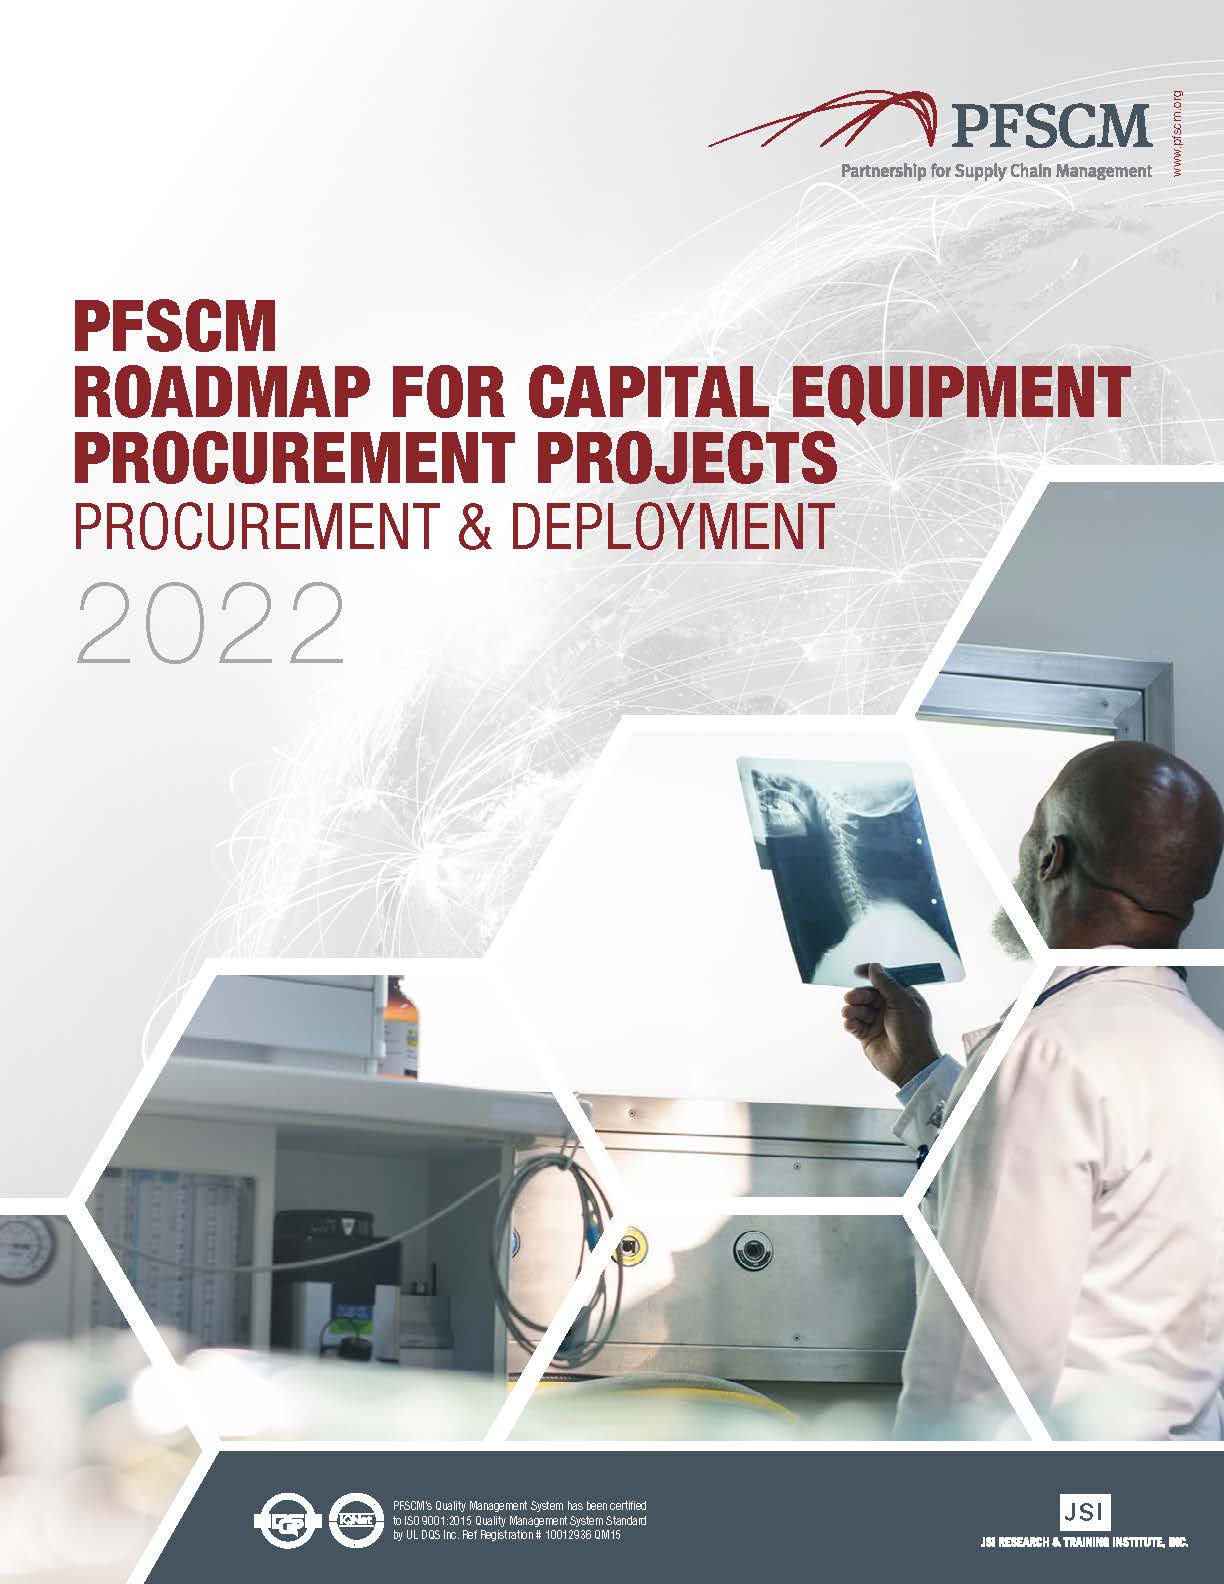 health products - Roadmap to capital equipment procurement projects